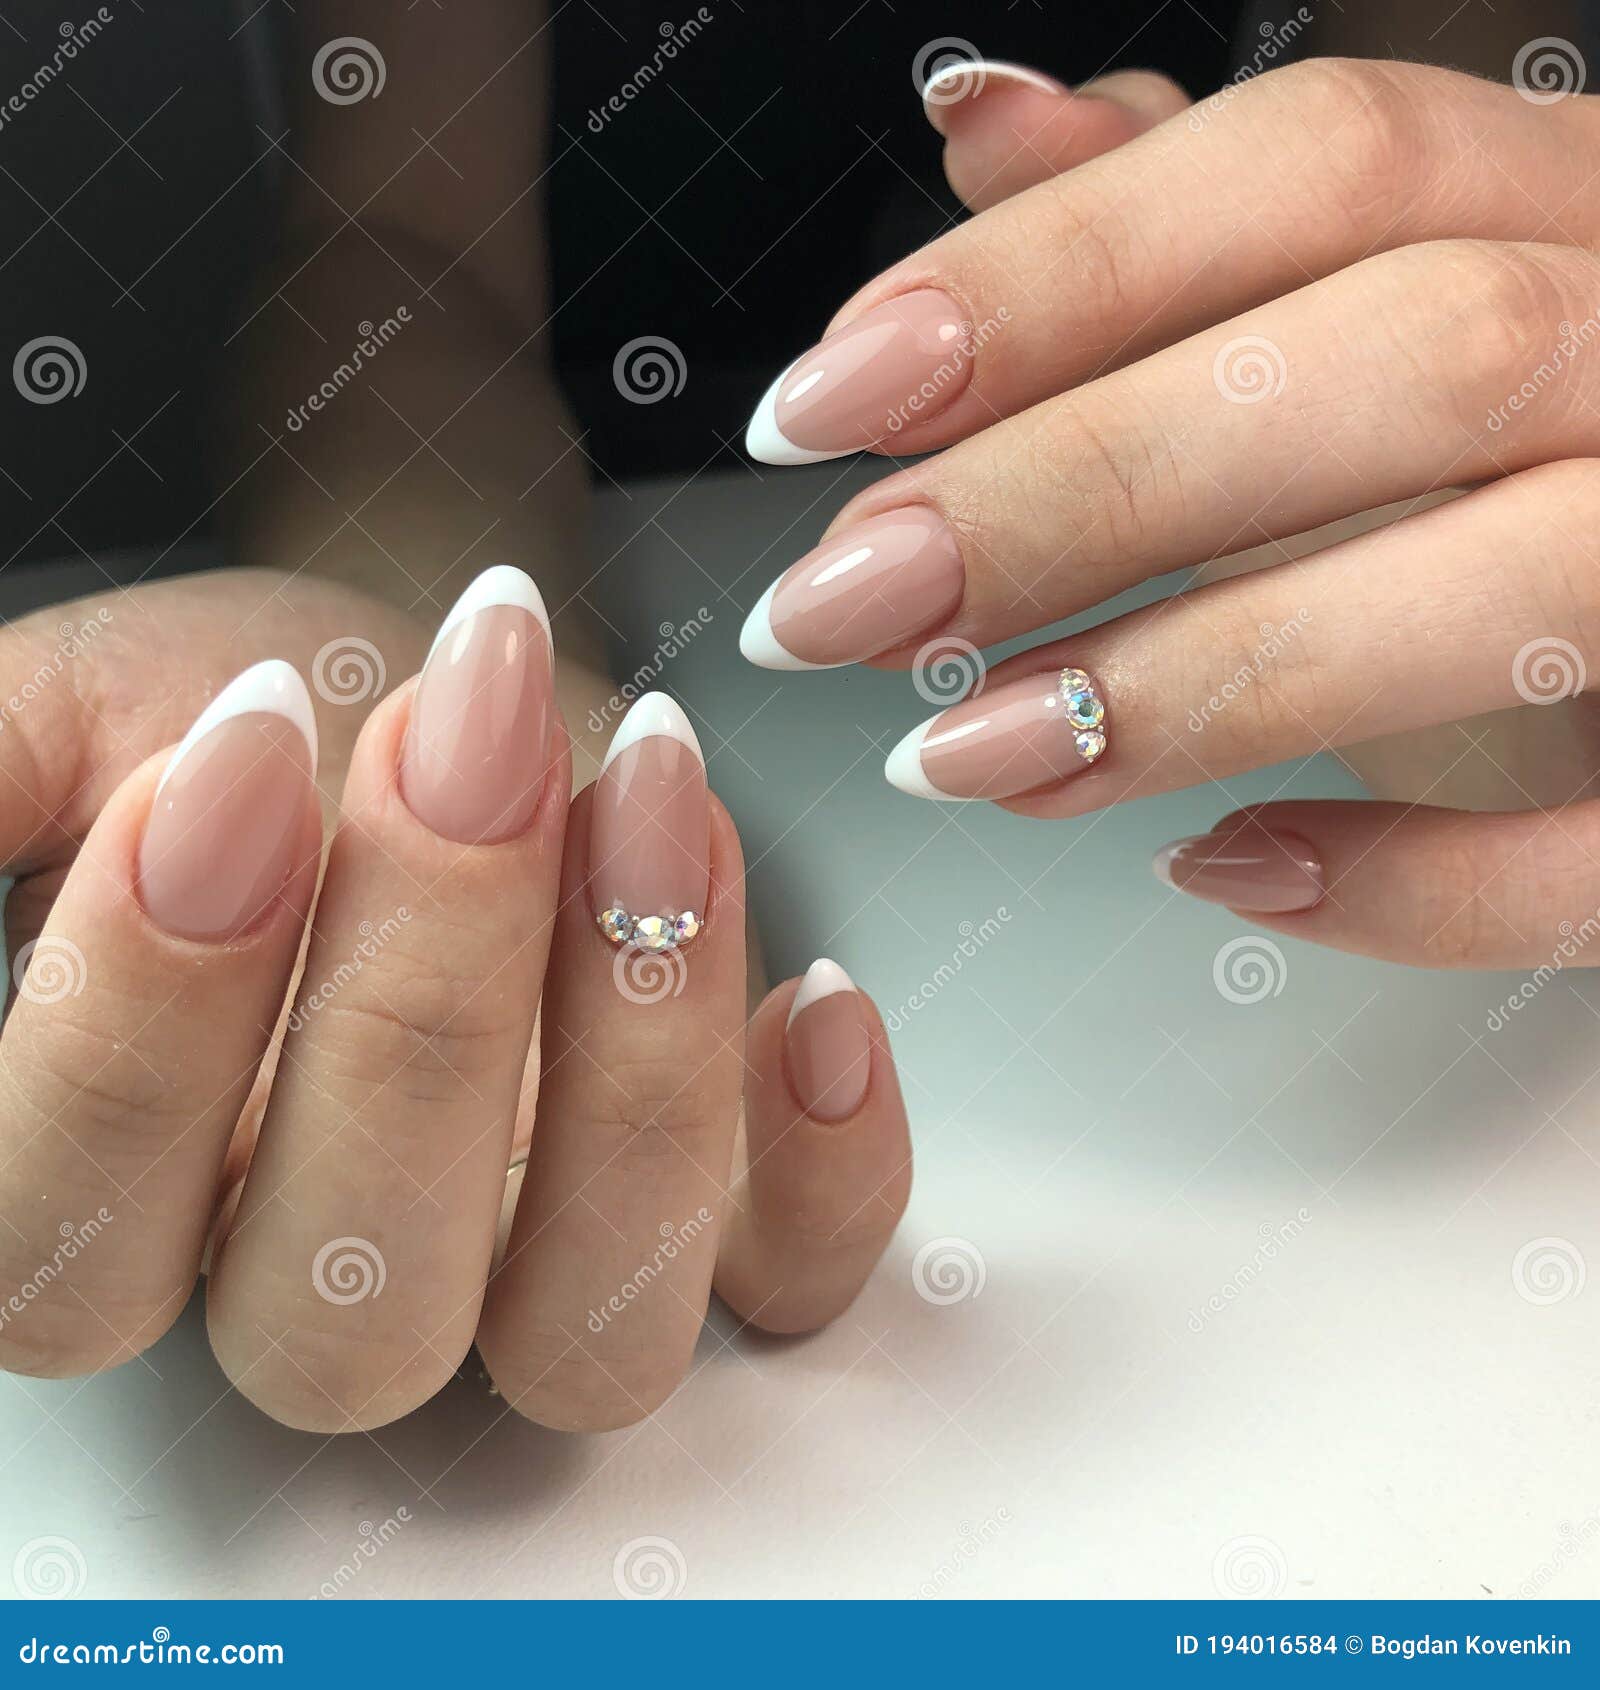 Gel Nails Acrylic Nails Shellac Nails French Manicure We Decode Most  Popular Manicure Styles